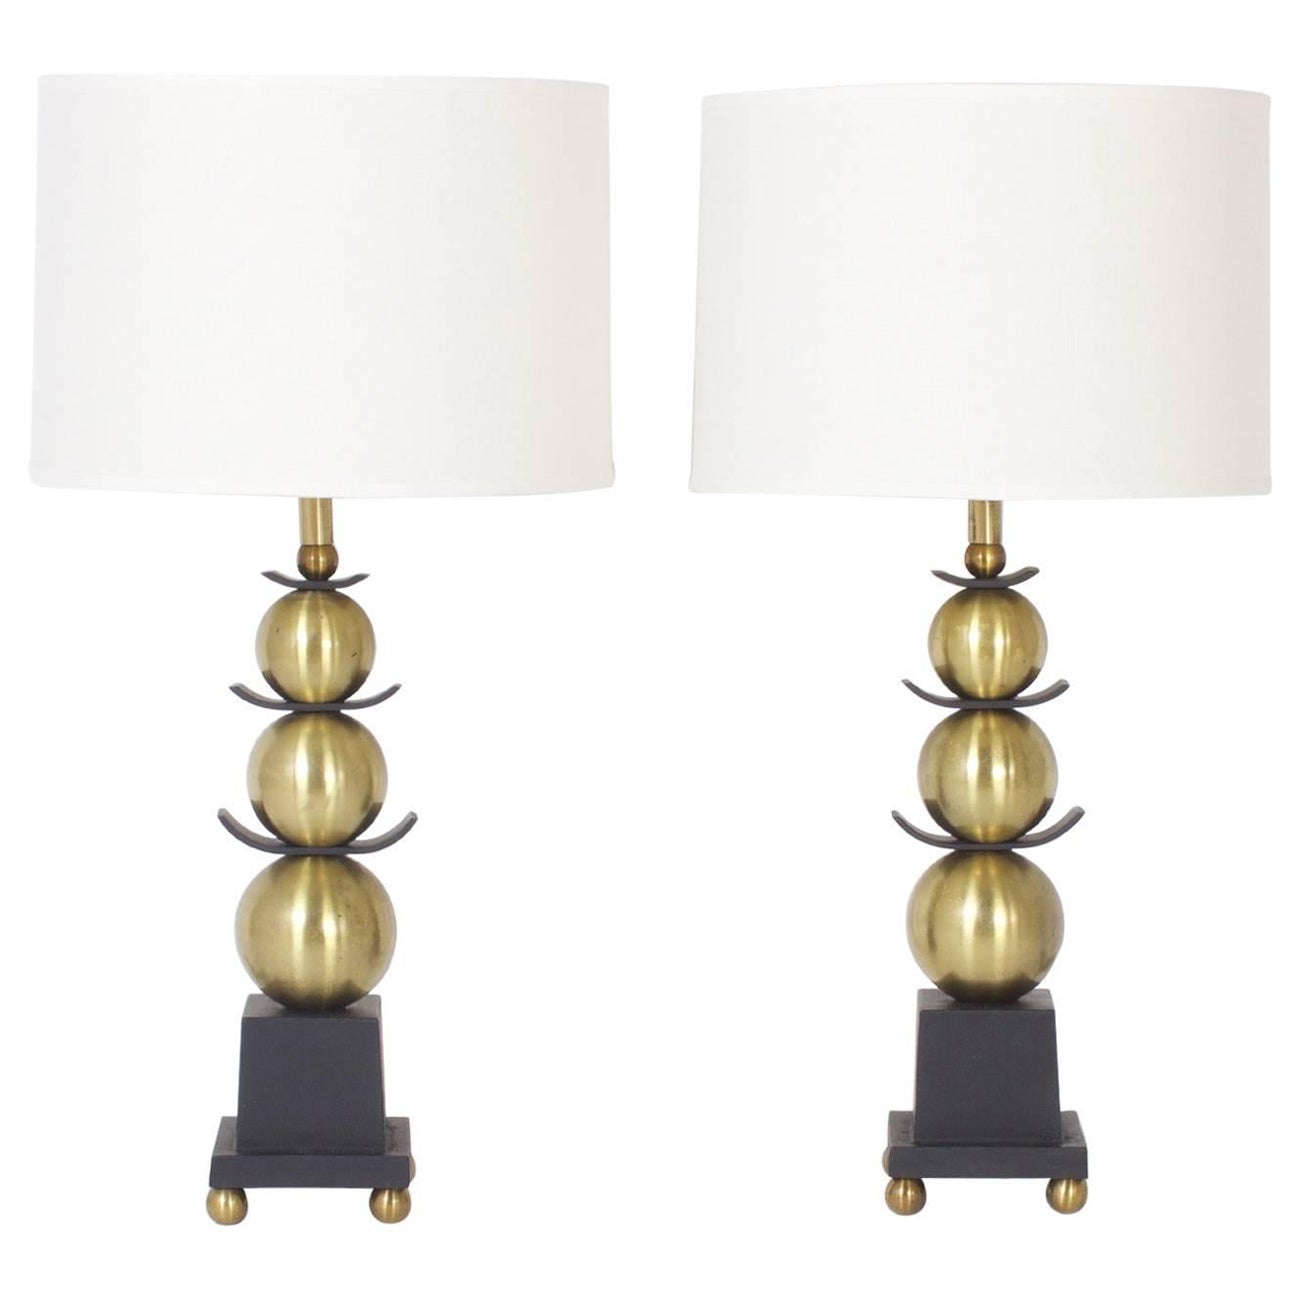 Pair of Mid-Century Brass Stacked Ball Table Lamps